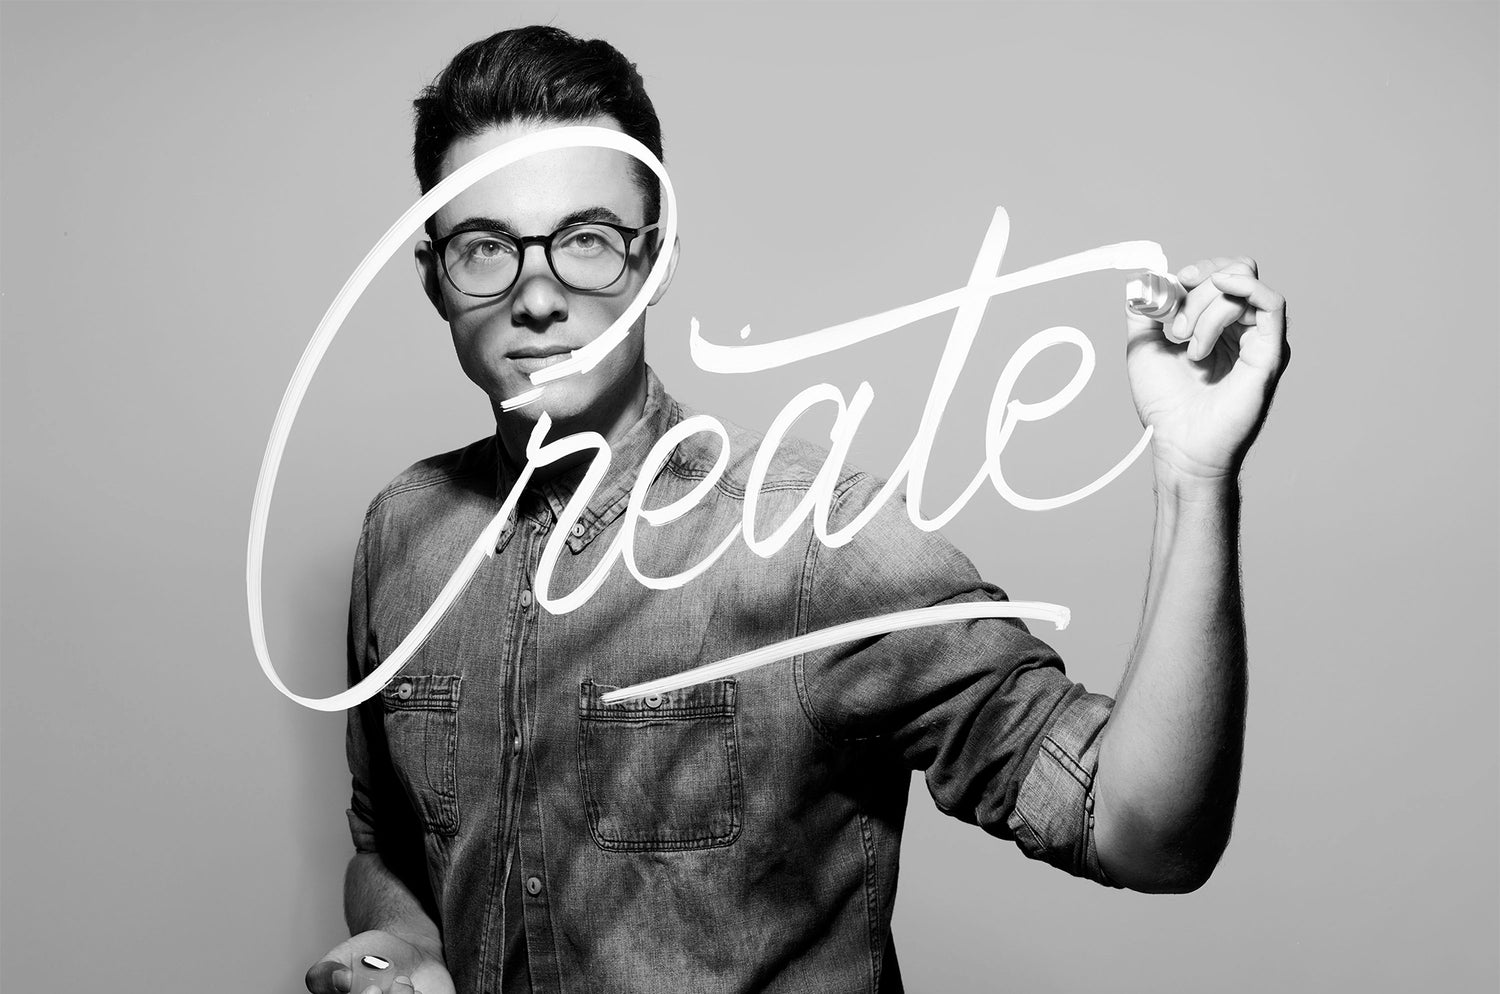 Stefan Kunz | From Banker to Letterer & the Value of Putting Yourself Out There